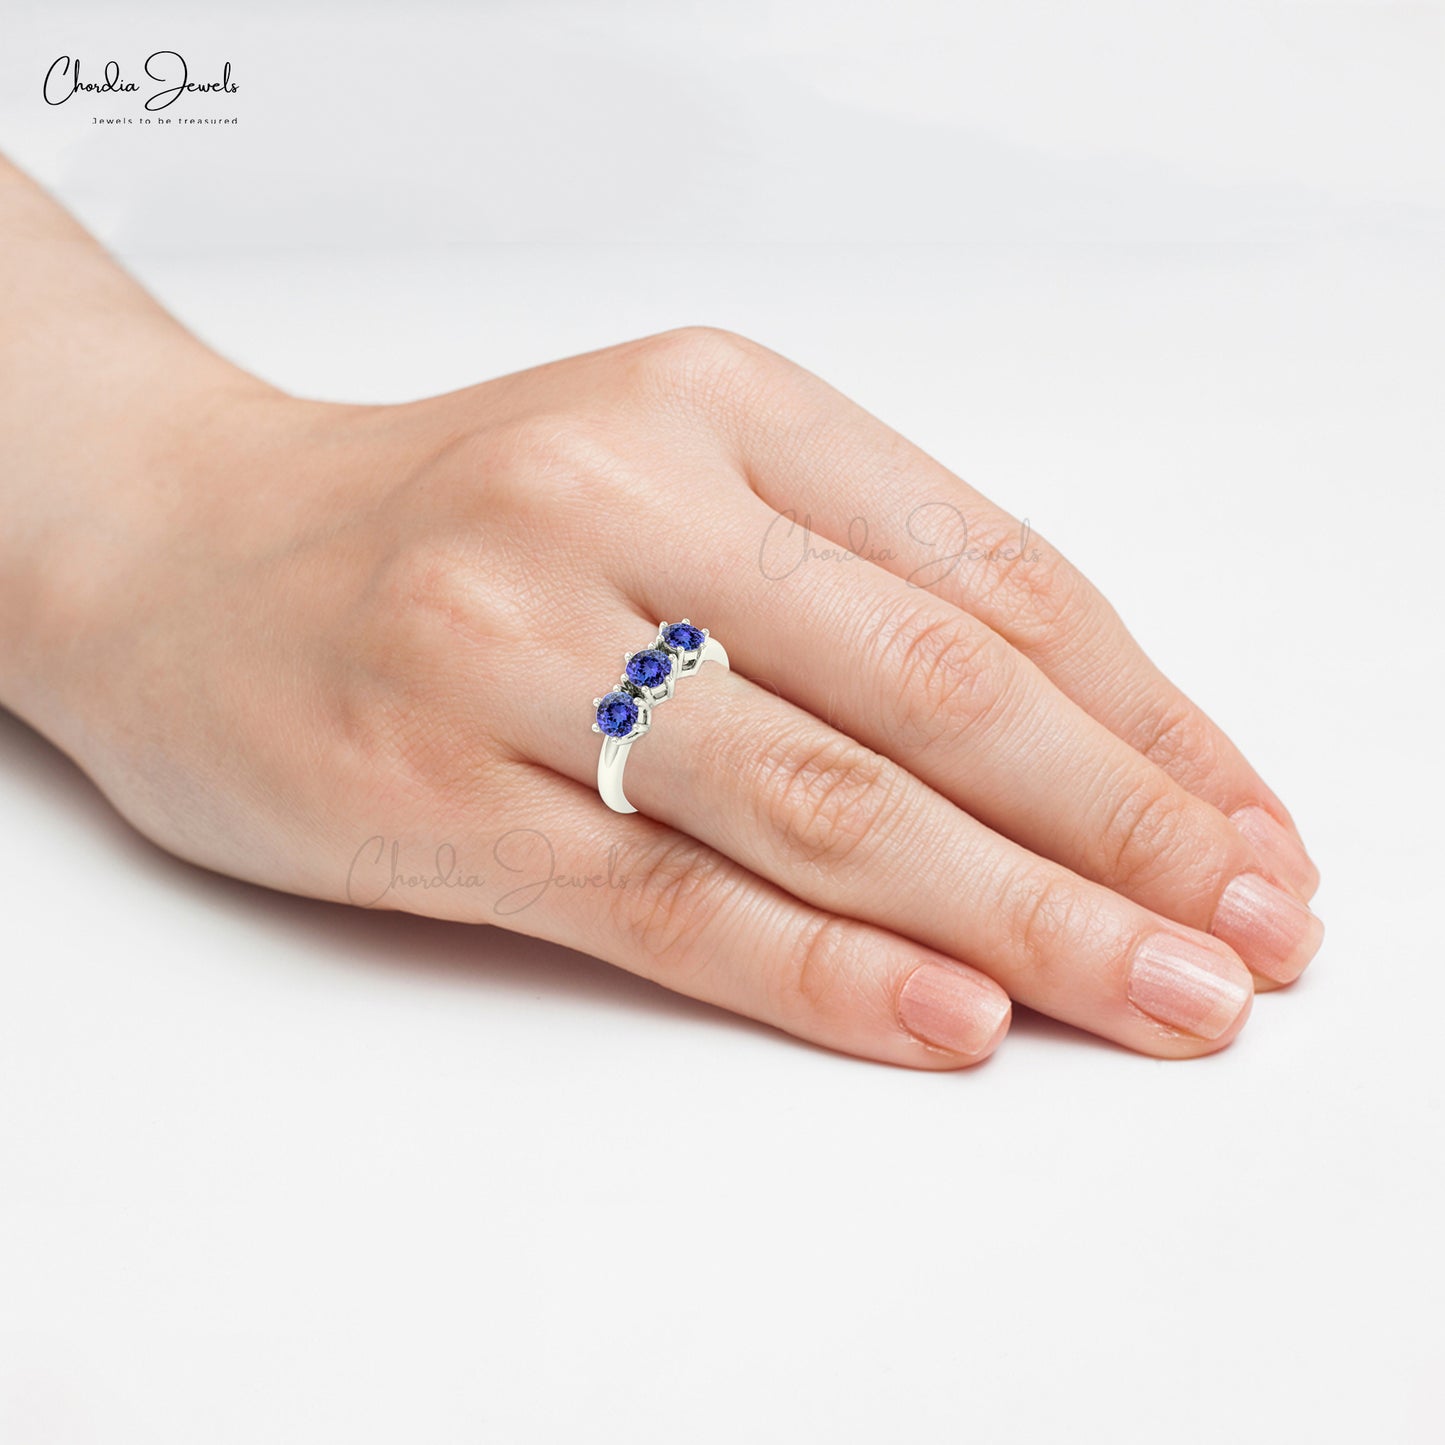 Trilogy Ring With Tanzanite Gemstone 14k Solid Gold Timeless Engagement Ring For Love